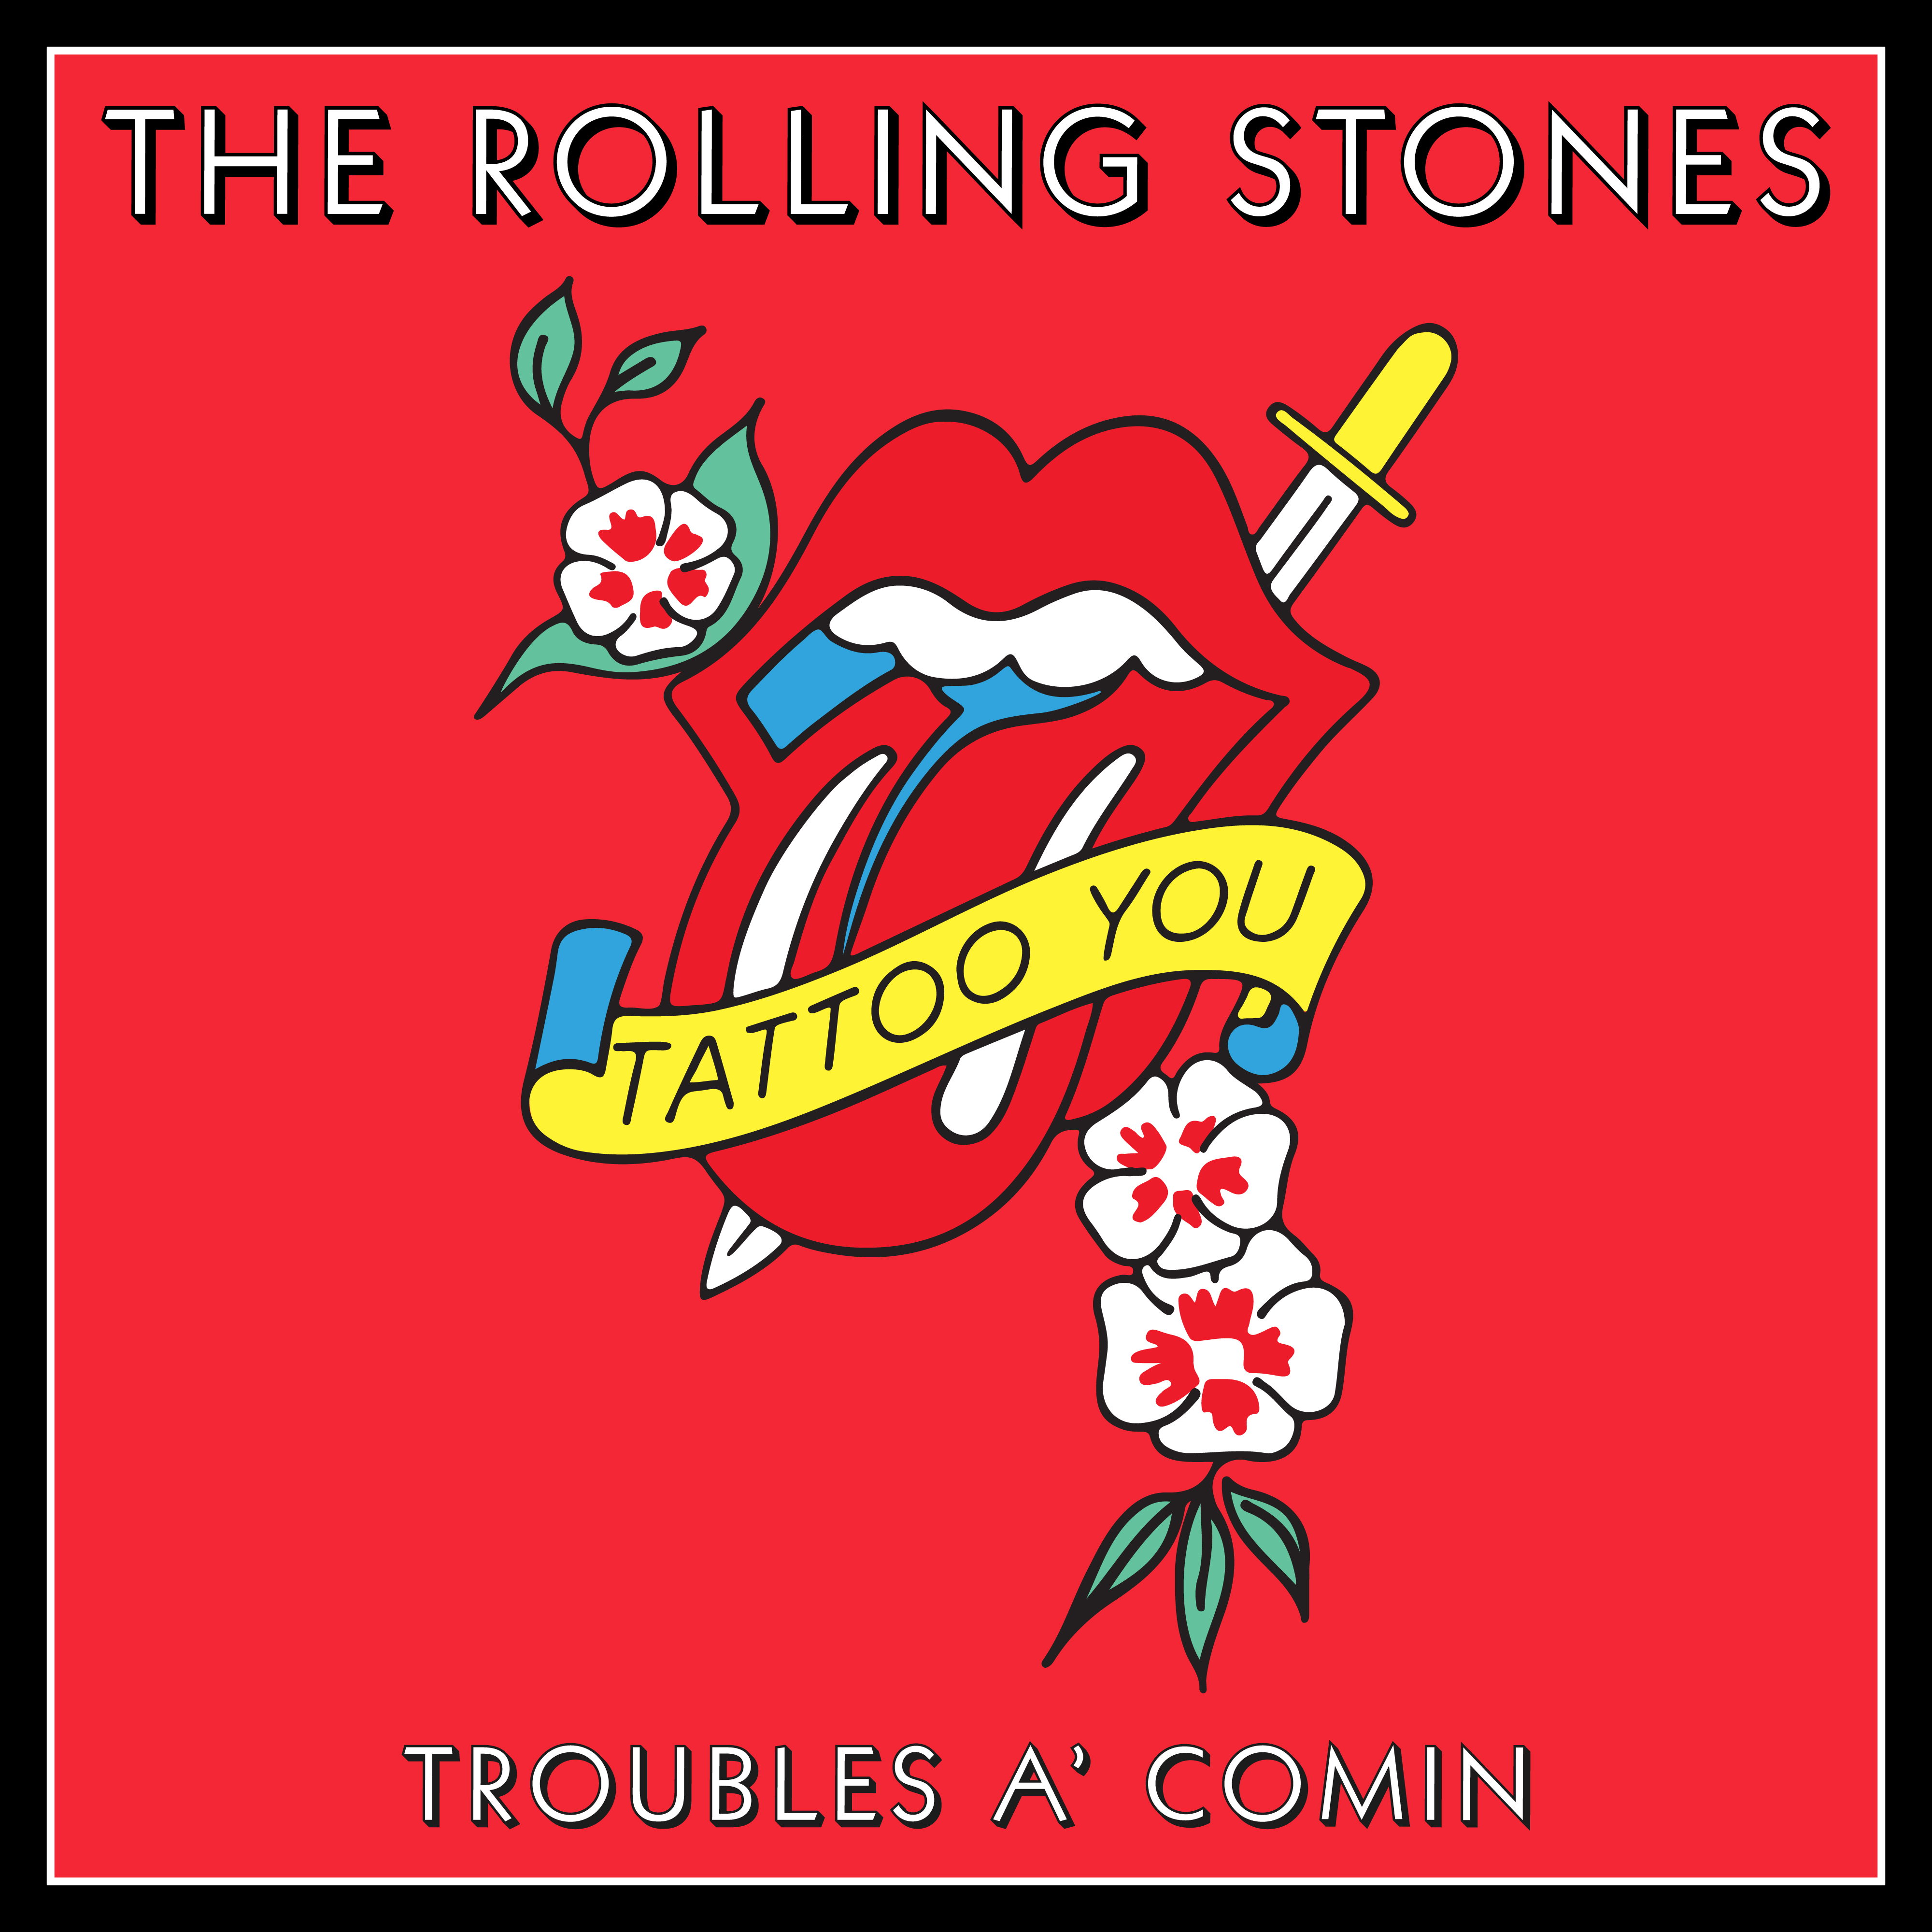 The Rolling Stones' Previously Unheard Track "Troubles A' Comin" Released Today